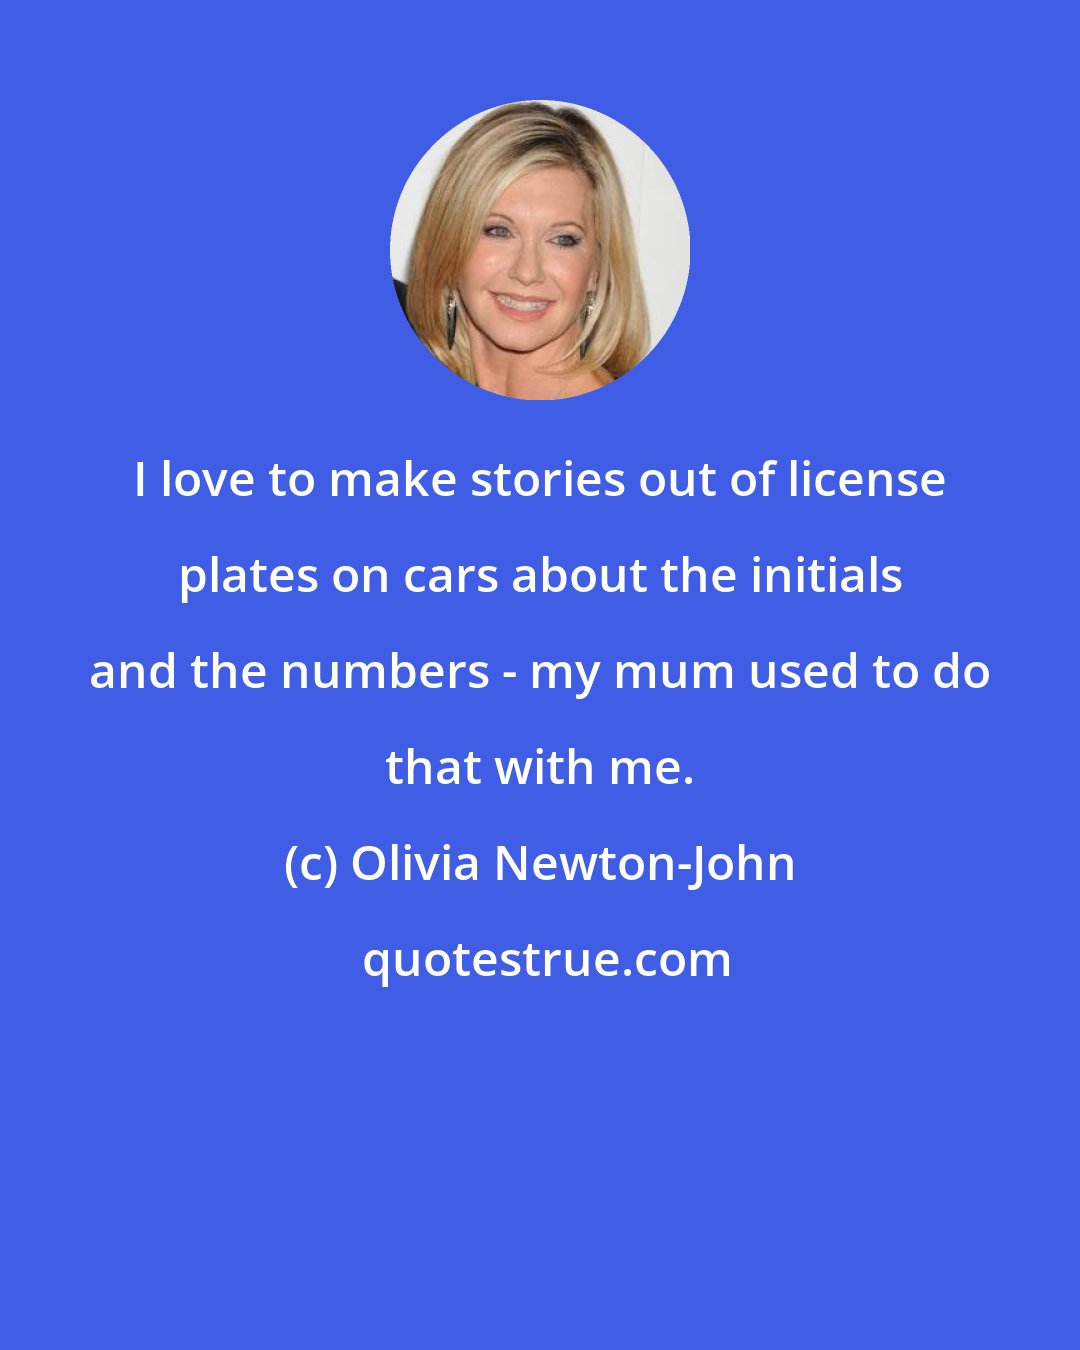 Olivia Newton-John: I love to make stories out of license plates on cars about the initials and the numbers - my mum used to do that with me.